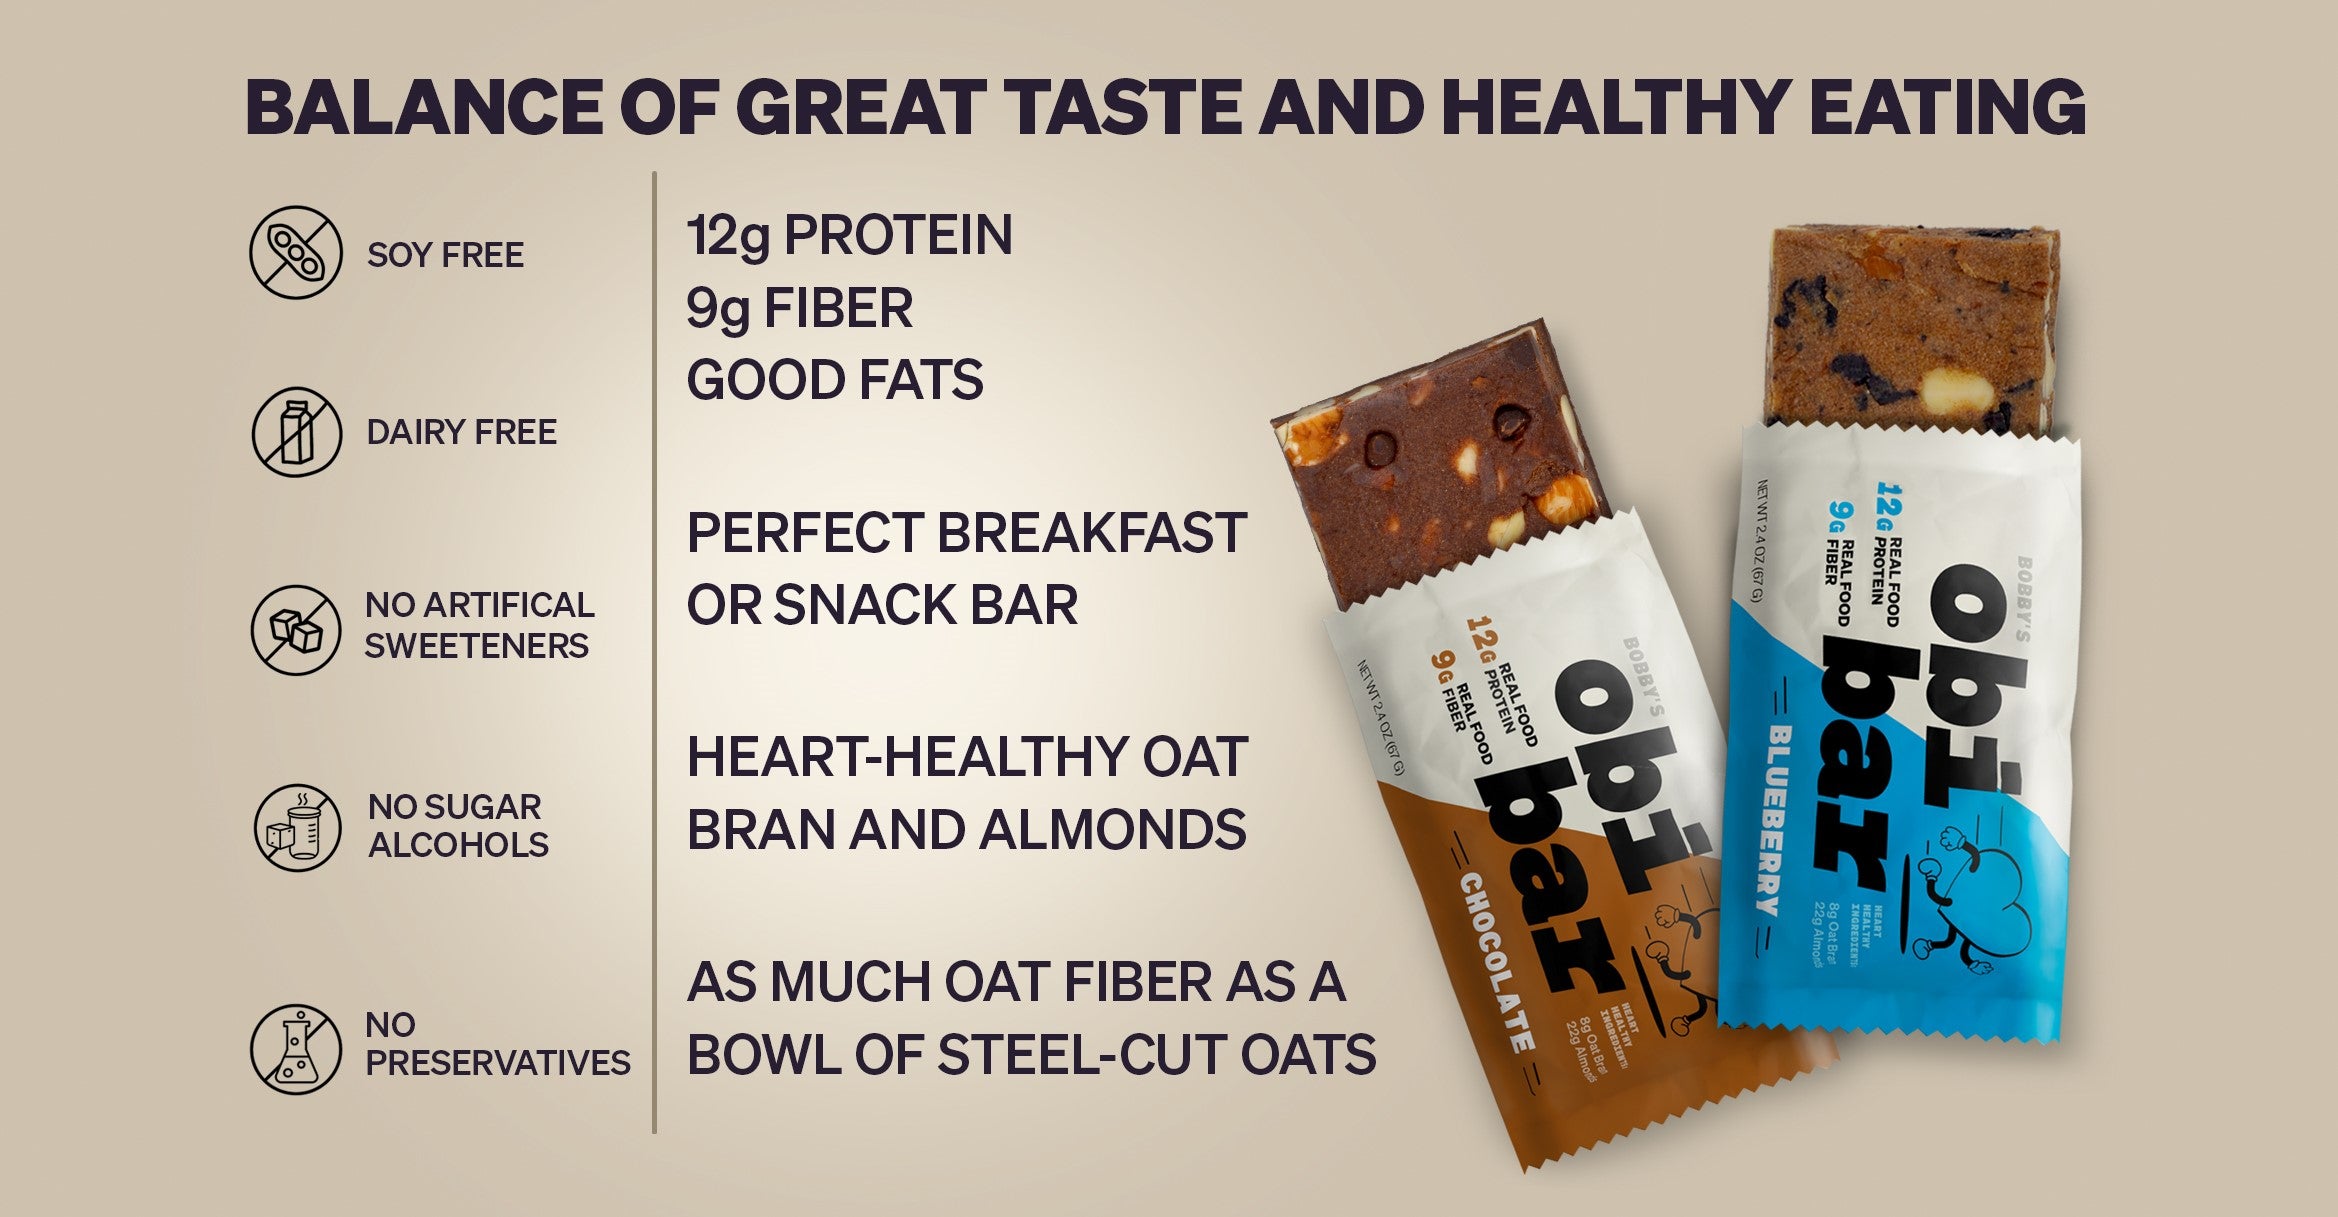 Obi bar is an all-natural high protein high fiber bar.  It is perfect as a healthy snack or meal replacement bar.  It is packed with oat fiber that contain soluble and insoluble fiber.  The soluble fiber provides heart and gut health.  The insoluble fiber promotes regularity.